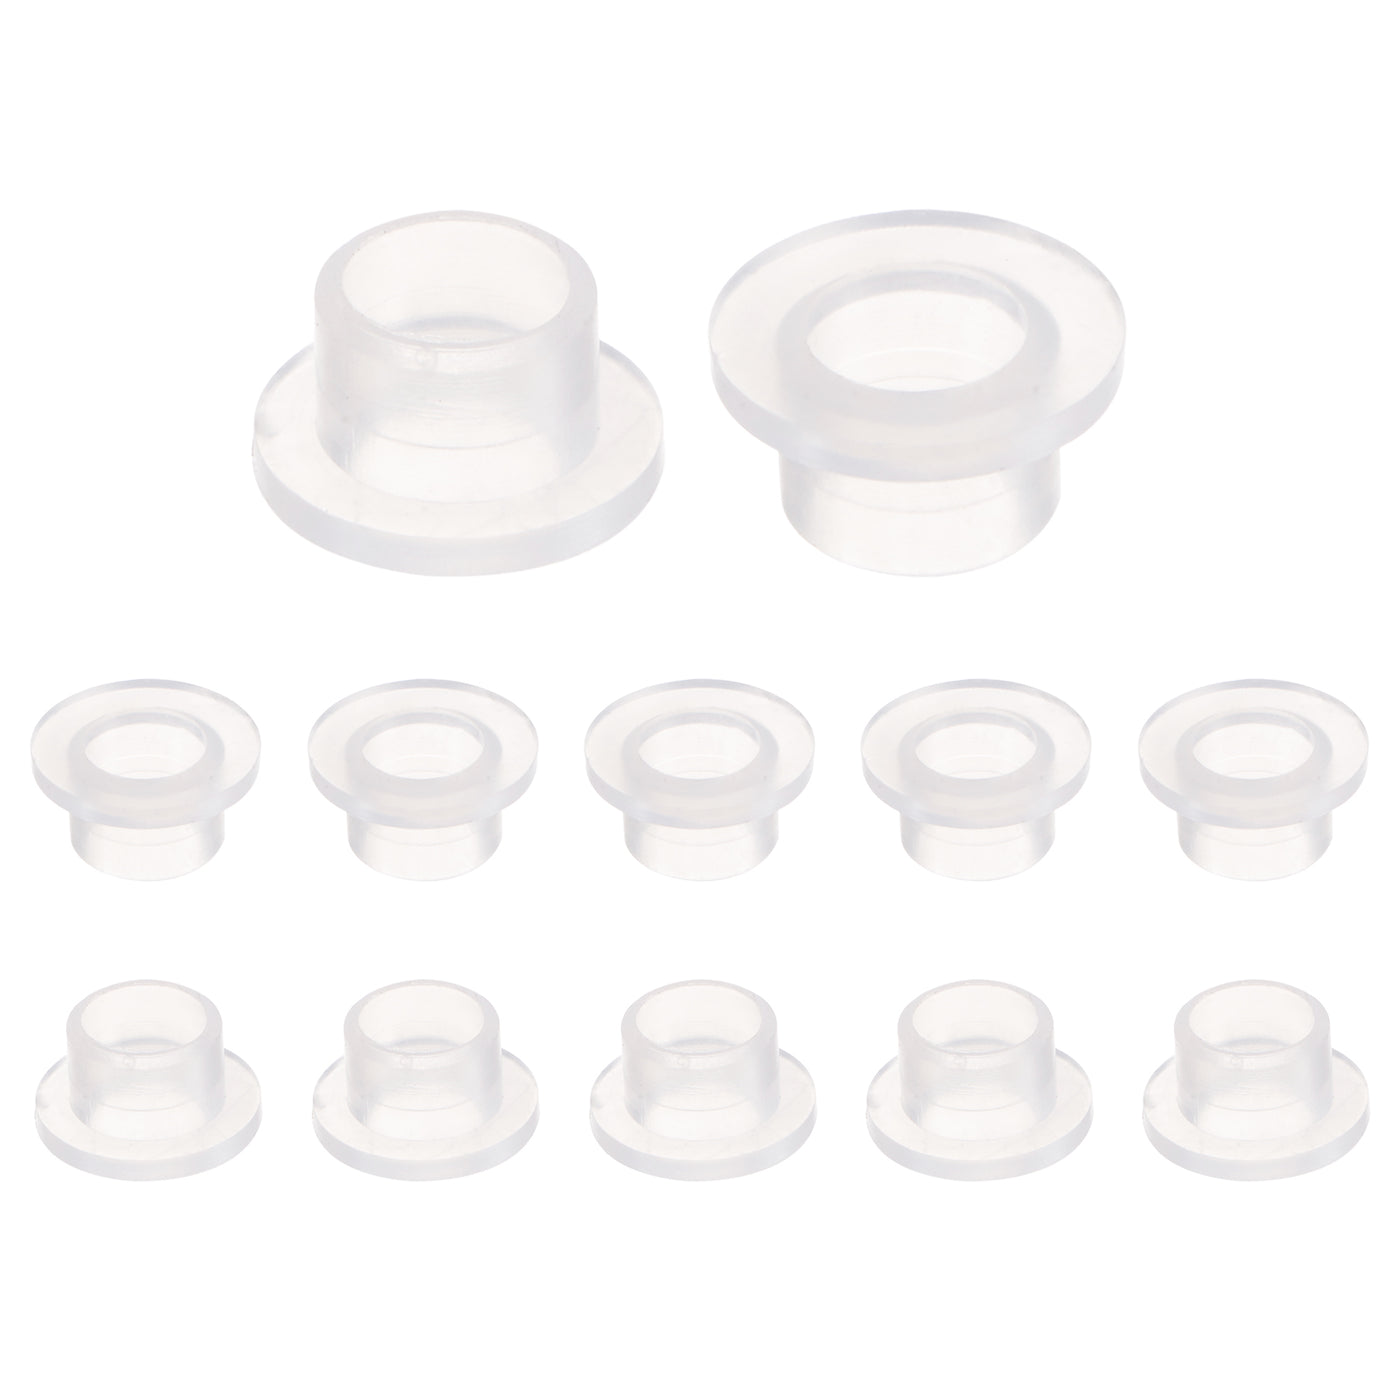 uxcell Uxcell 12pcs Flanged Sleeve Bearings 6mm ID 7.7mm OD 6mm Length Nylon Bushings, White